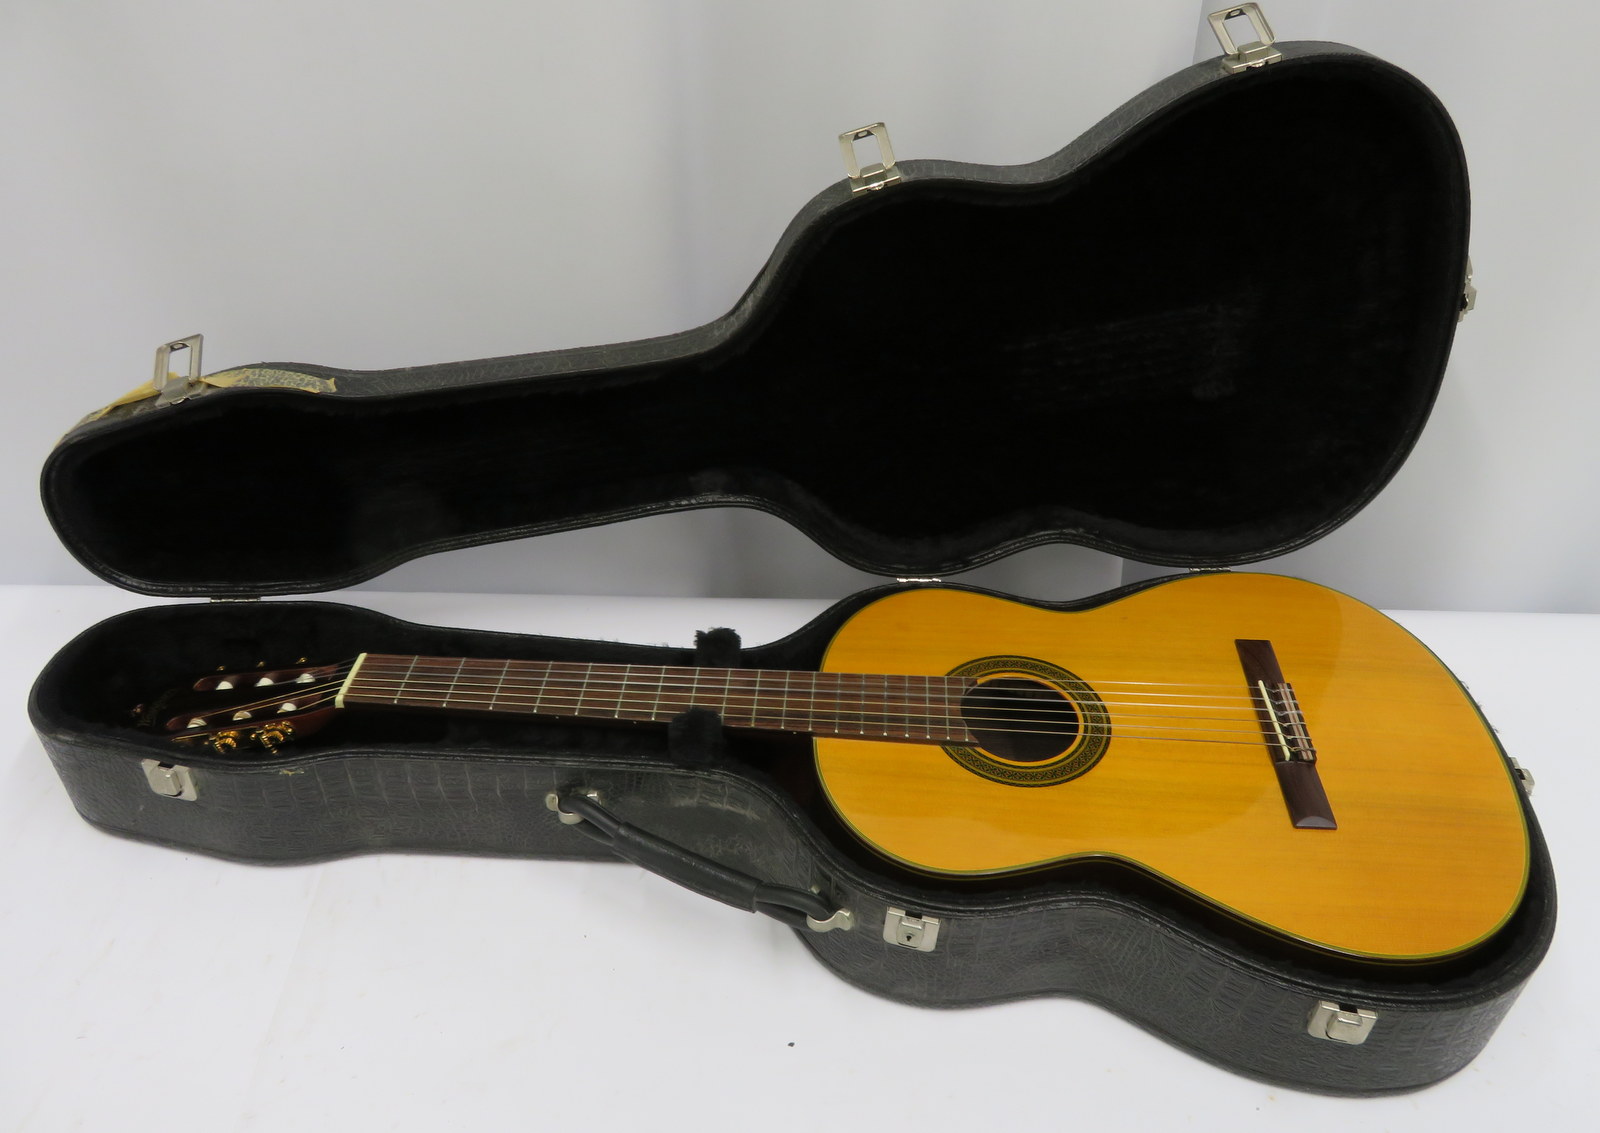 Washburn Enrique Tapicas C8S acoustic guitar with case. Serial number: 96010012.